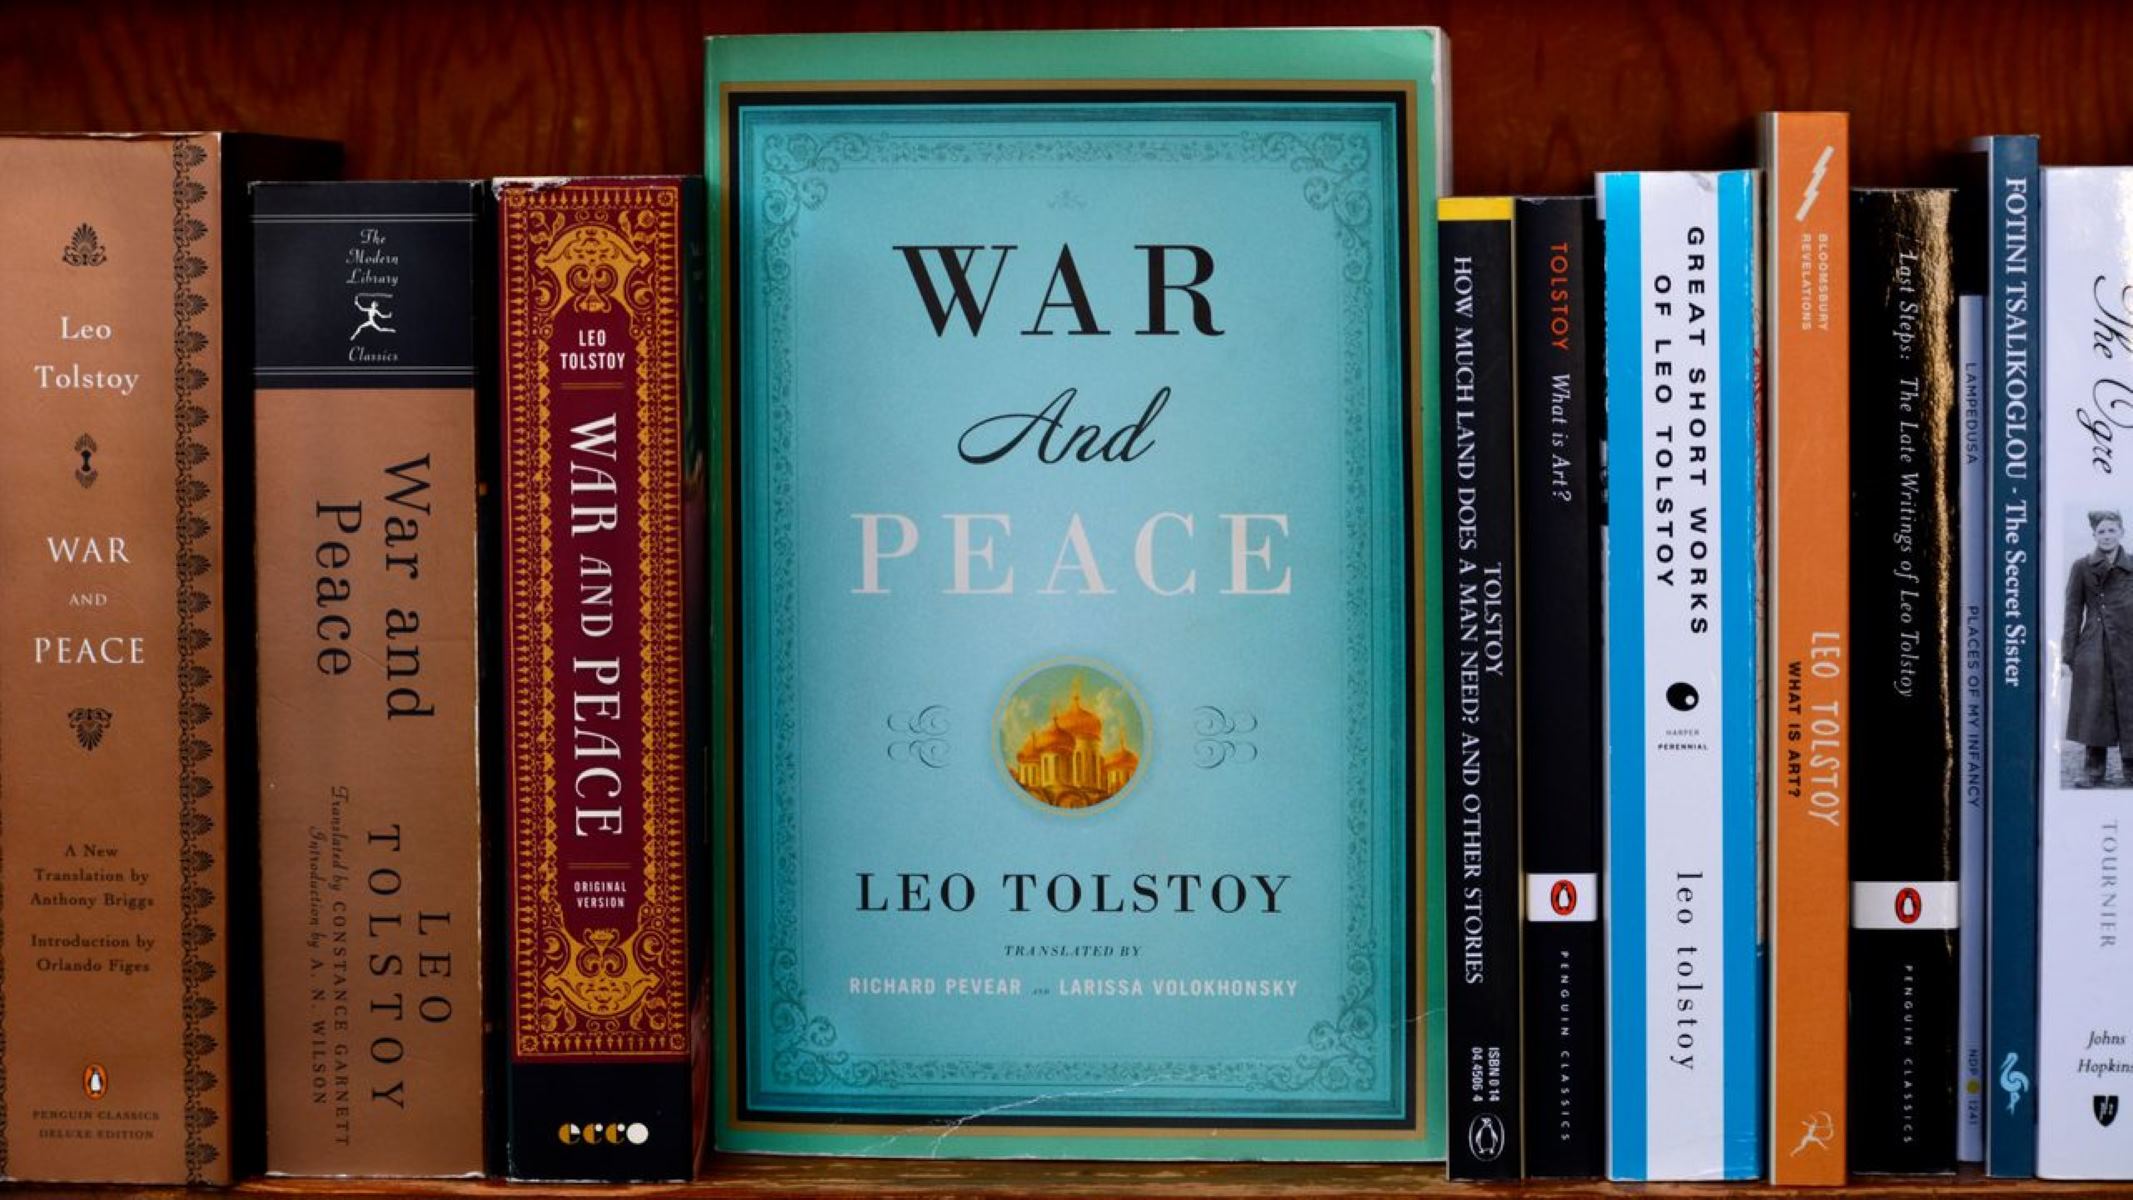 19-enigmatic-facts-about-war-and-peace-leo-tolstoy